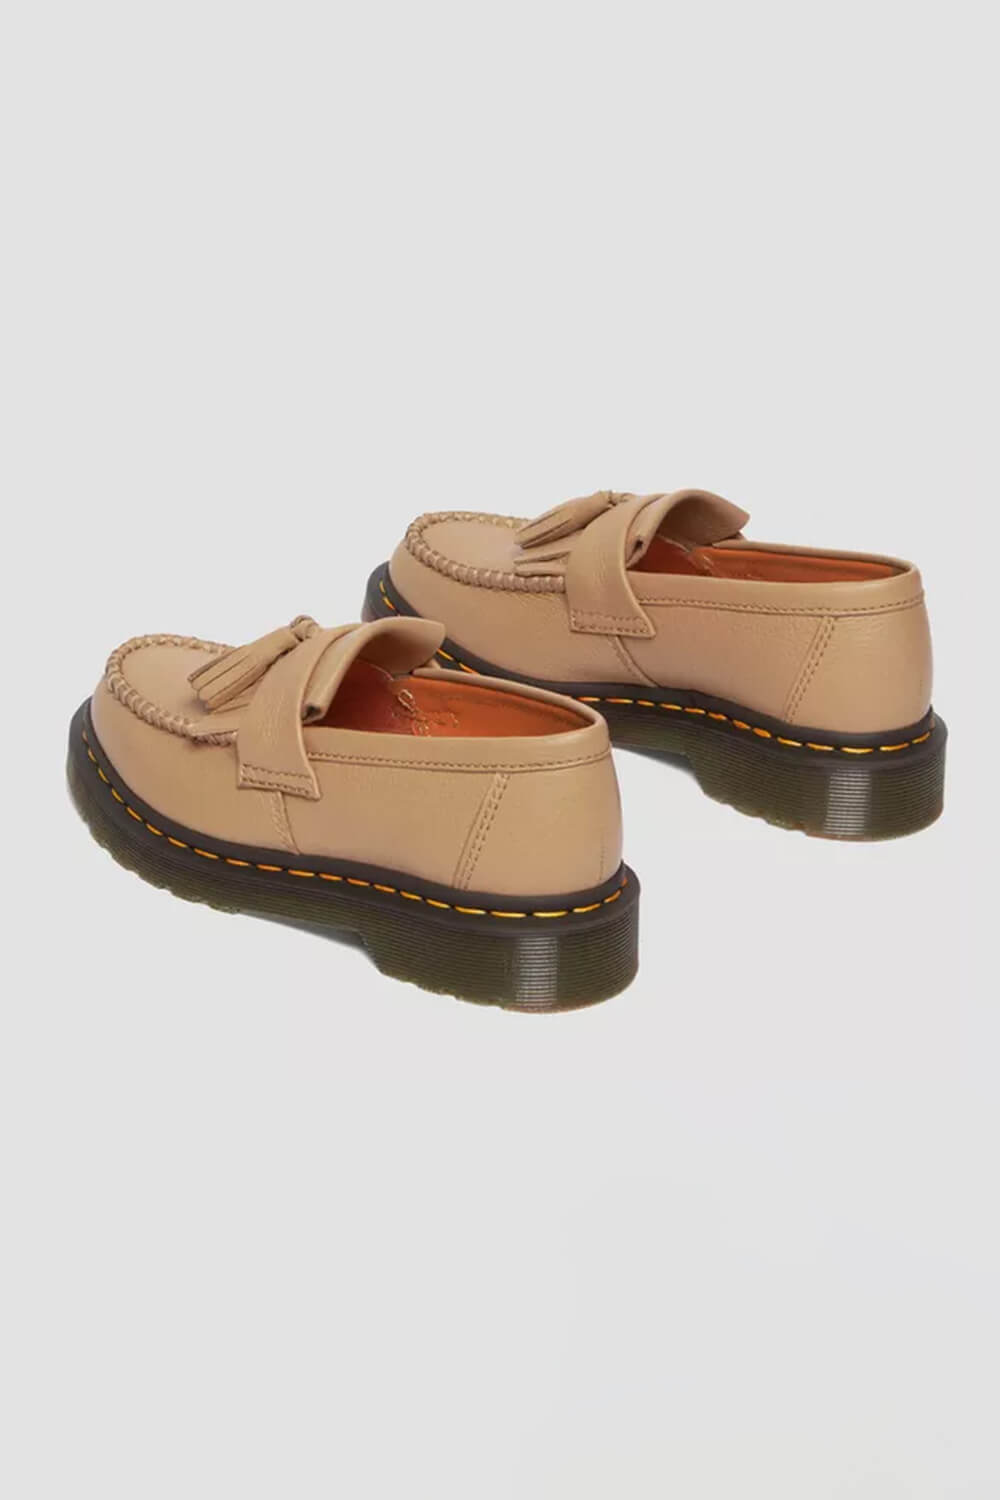 Dr. Martens Adrian Virginia Leather Tassel Loafers for Women in 